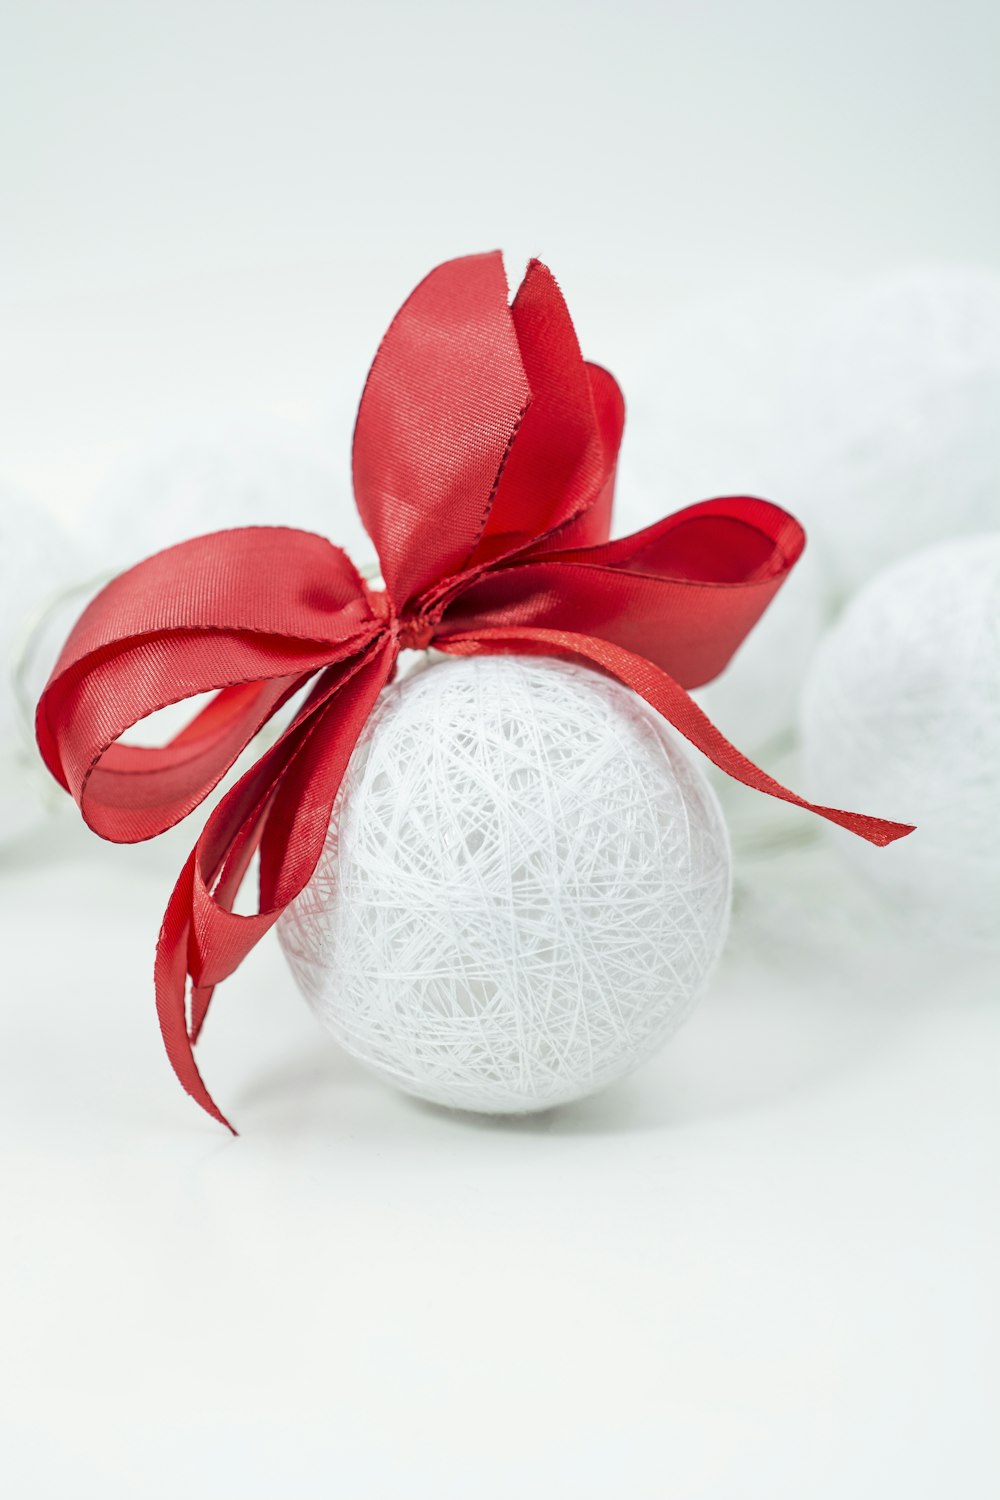 white and red ball decor